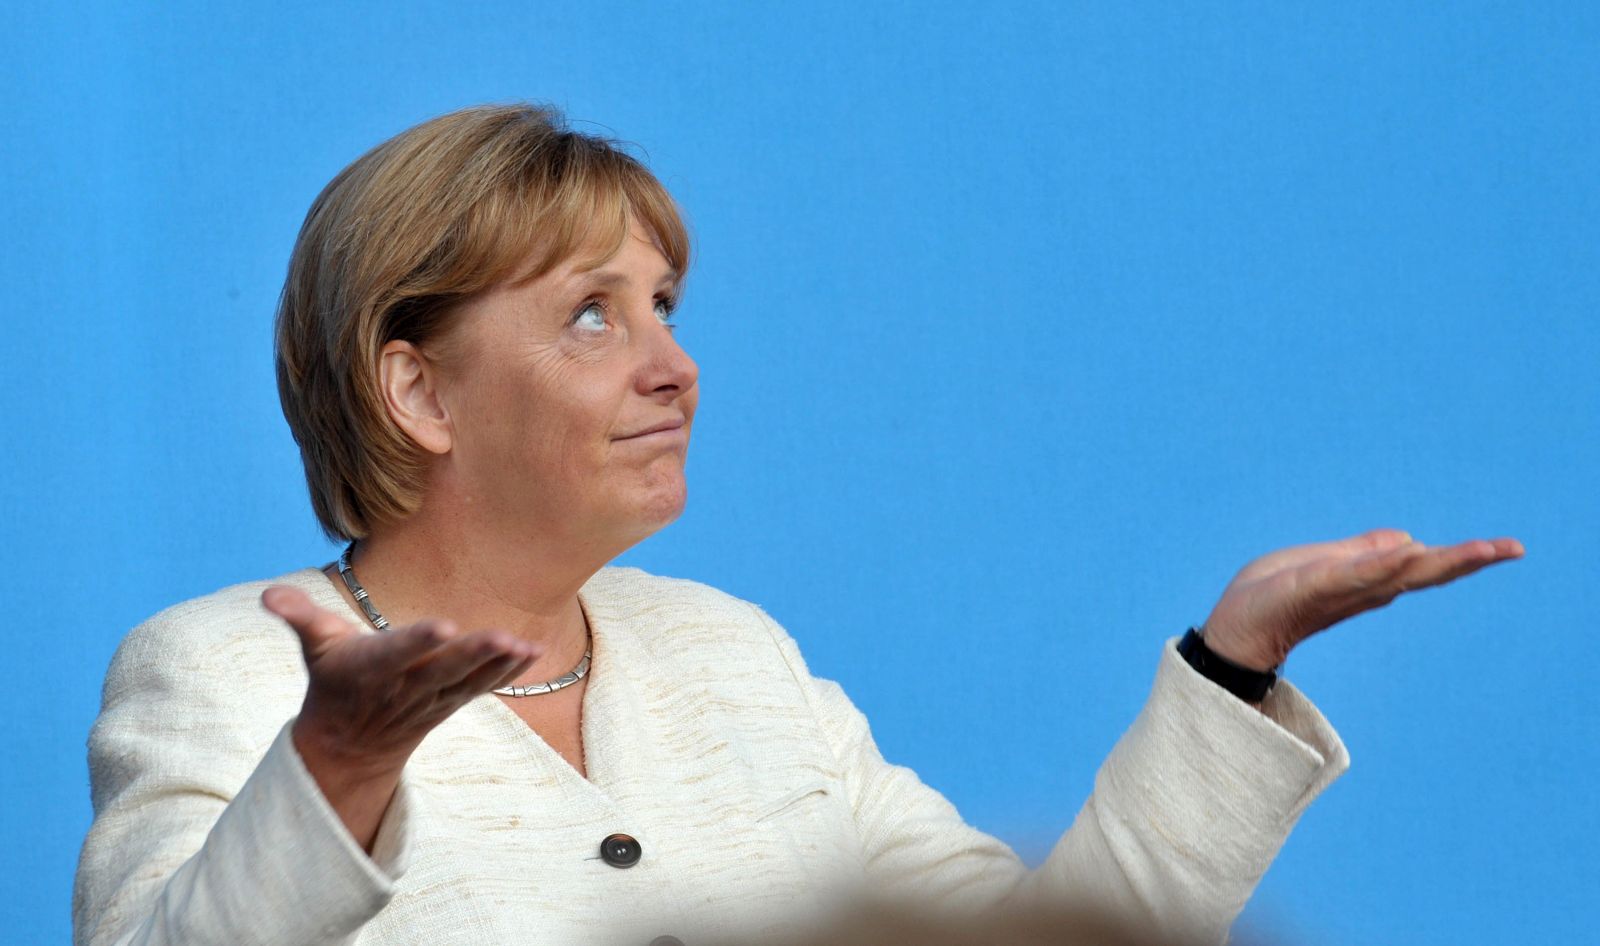 epa09618267 (17/26) (FILE) - German Chancellor Angela Merkel and CDU (Germany's Christian Democrats) frontrunner in the upcoming Bundestag elections holds up her hands as it begins to rain during her speech at an election campaign event on Norderney island, Germany, 17 August 2009 (reissued 03 December 2021). German conservative party CDU's then leader Angela Merkel was sworn in as German Chancellor on 22 November 2005, following coalition negotiations after the federal elections in Germany. Merkel, the longest-serving leader in the EU to date, was re-elected to office three times in 2009, 2013, and 2017, and announced in October 2018 that she will neither run for re-election as party chair in December 2018 nor seek a fifth term as Chancellor in the September 2021 general elections. She received her certificate of dismissal from the German president on 26 October 2021, her successor is scheduled to be sworn in between 06 and 10 December 2021.  EPA/CARMEN JASPERSEN GERMANY OUT

 ATTENTION: This Image is part of a PHOTO SET GERMANY OUT *** Local Caption *** 54818402